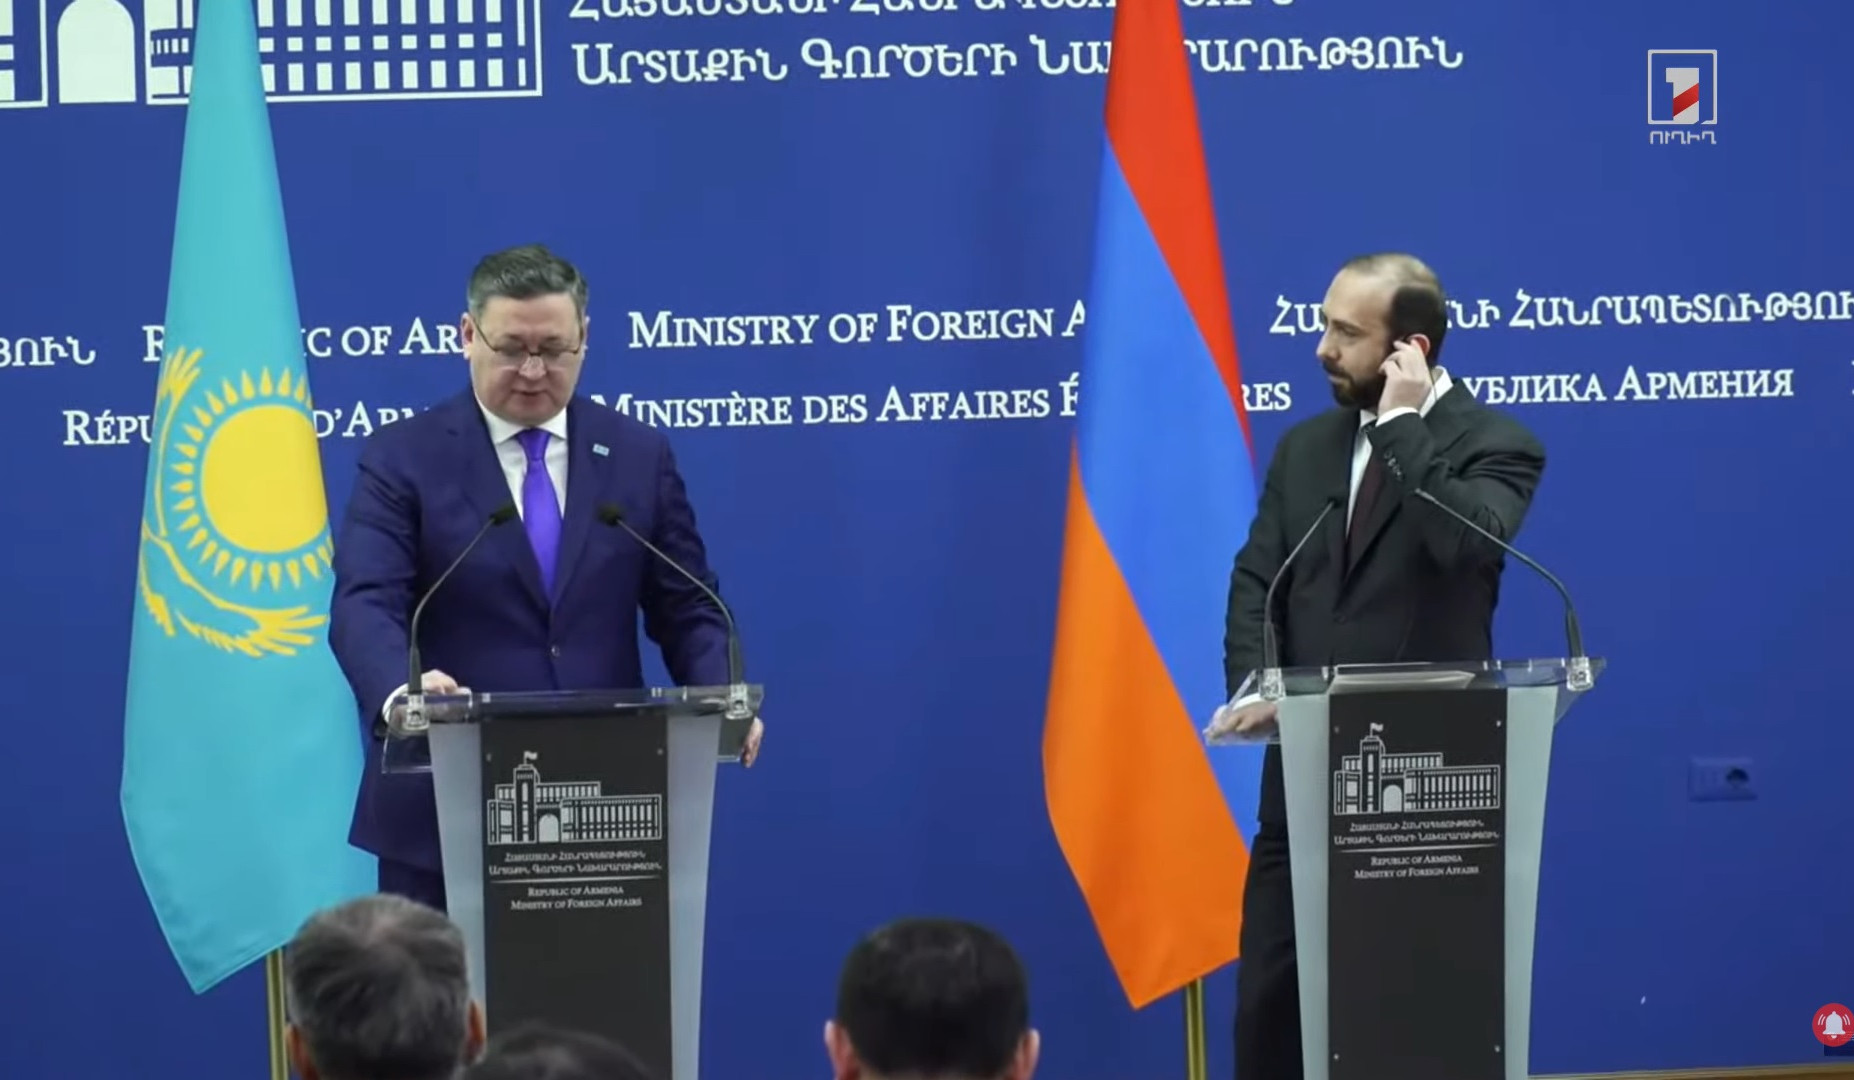 Armenia has Crossroads of Peace project, which is extremely important for our countries: Nurtleu